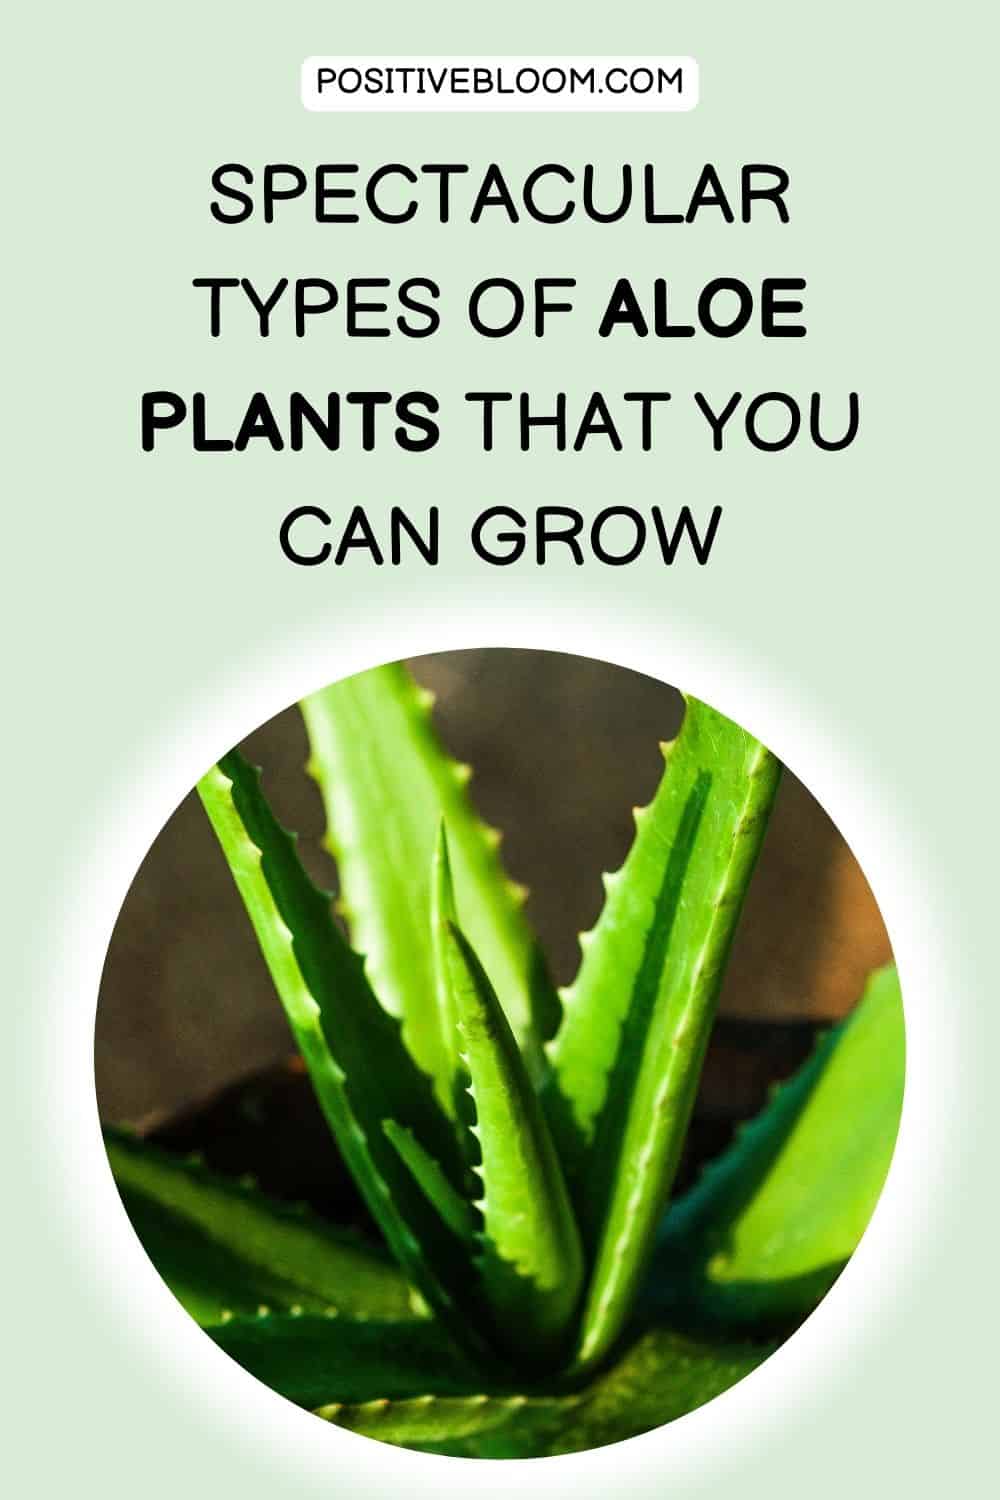 Spectacular Types Of Spectacular Types Of Aloe Plants That You Can Grow That You Can Grow Pinterest